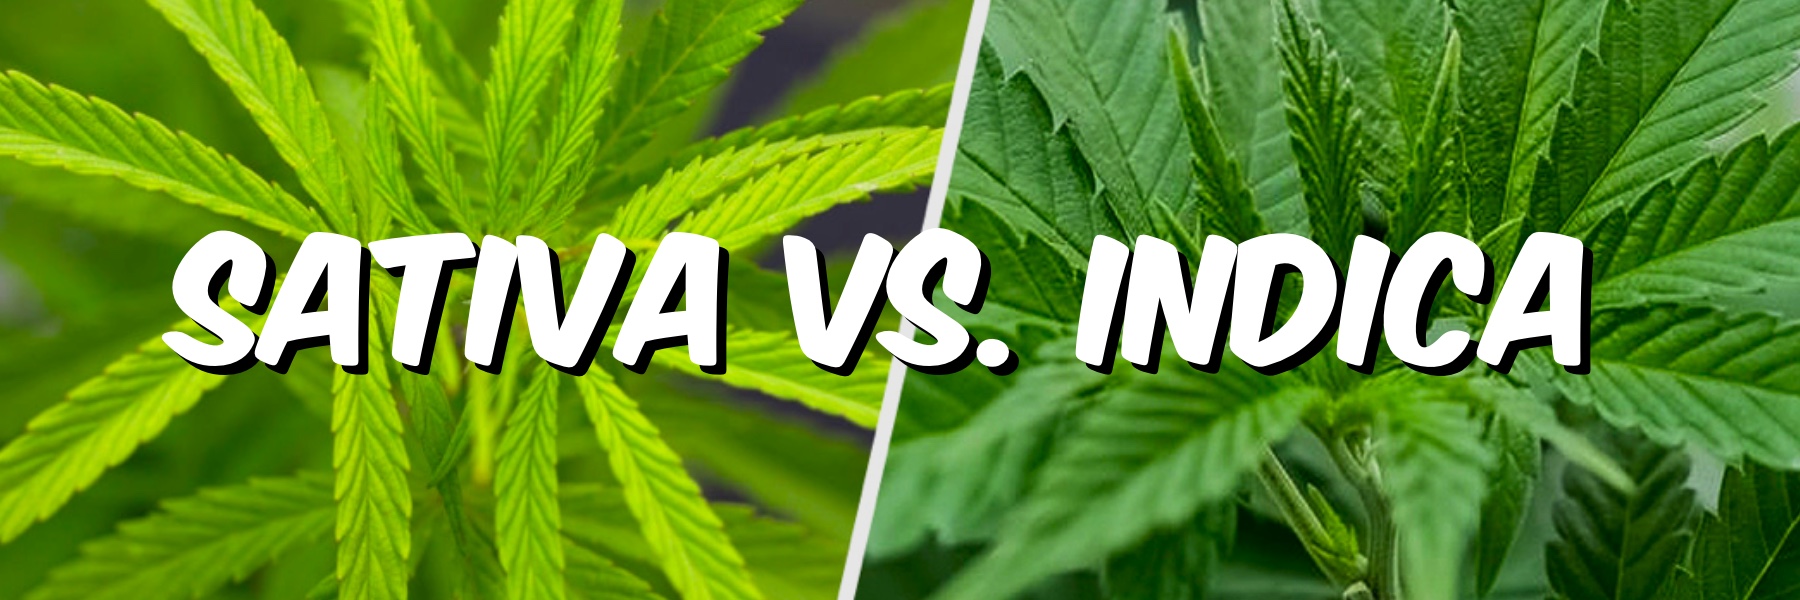 differences between sativa and indica